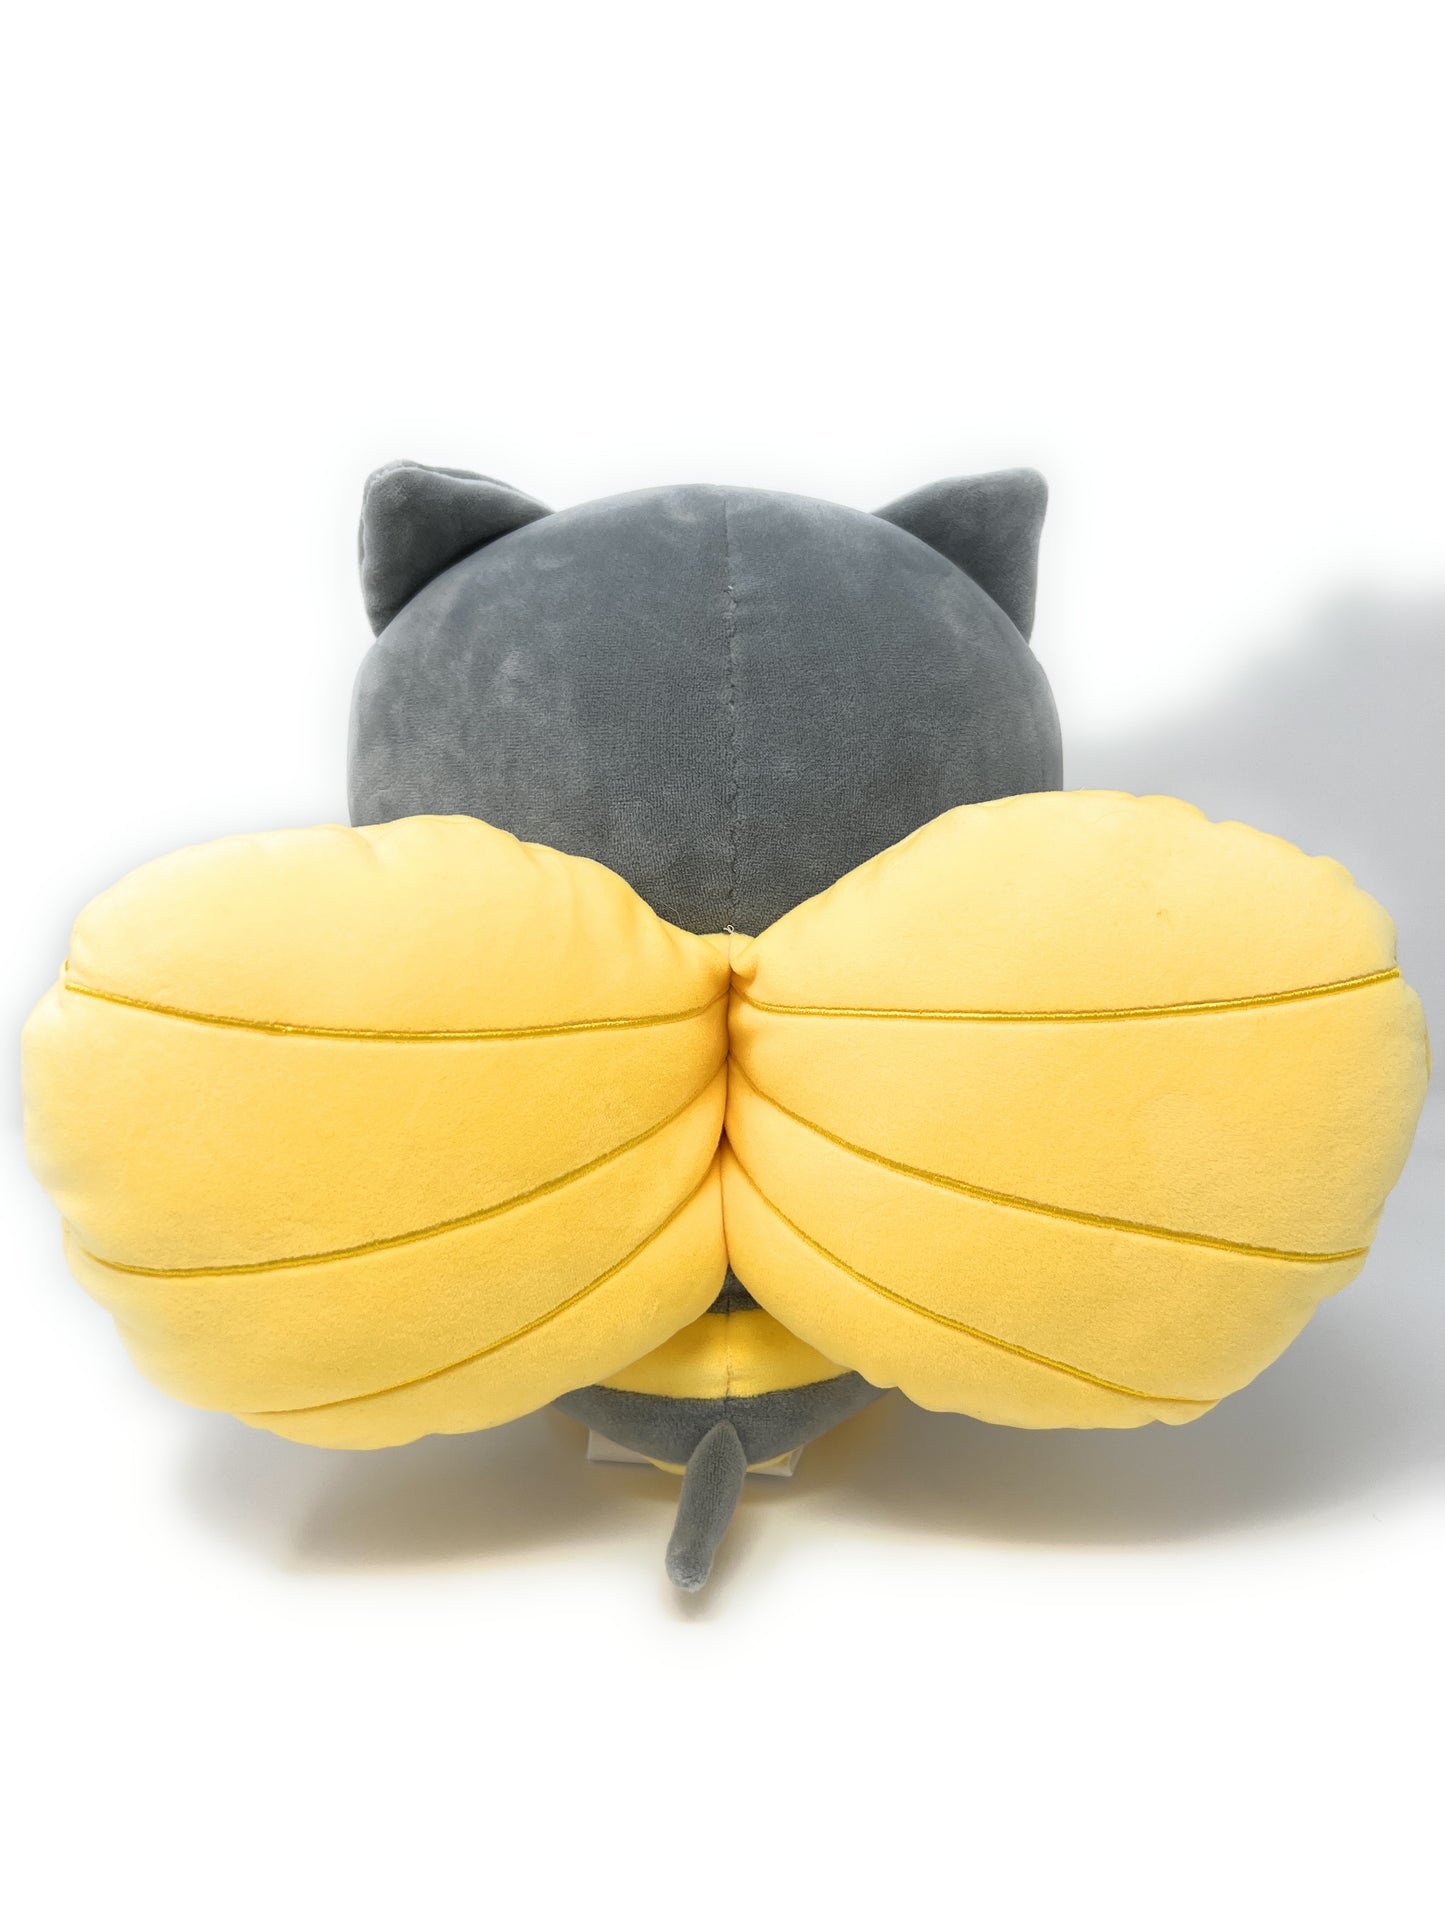 Make It Good 11-Inch Plush Toy: Cute Cat in Bee Costume, Soft and Cuddly Material